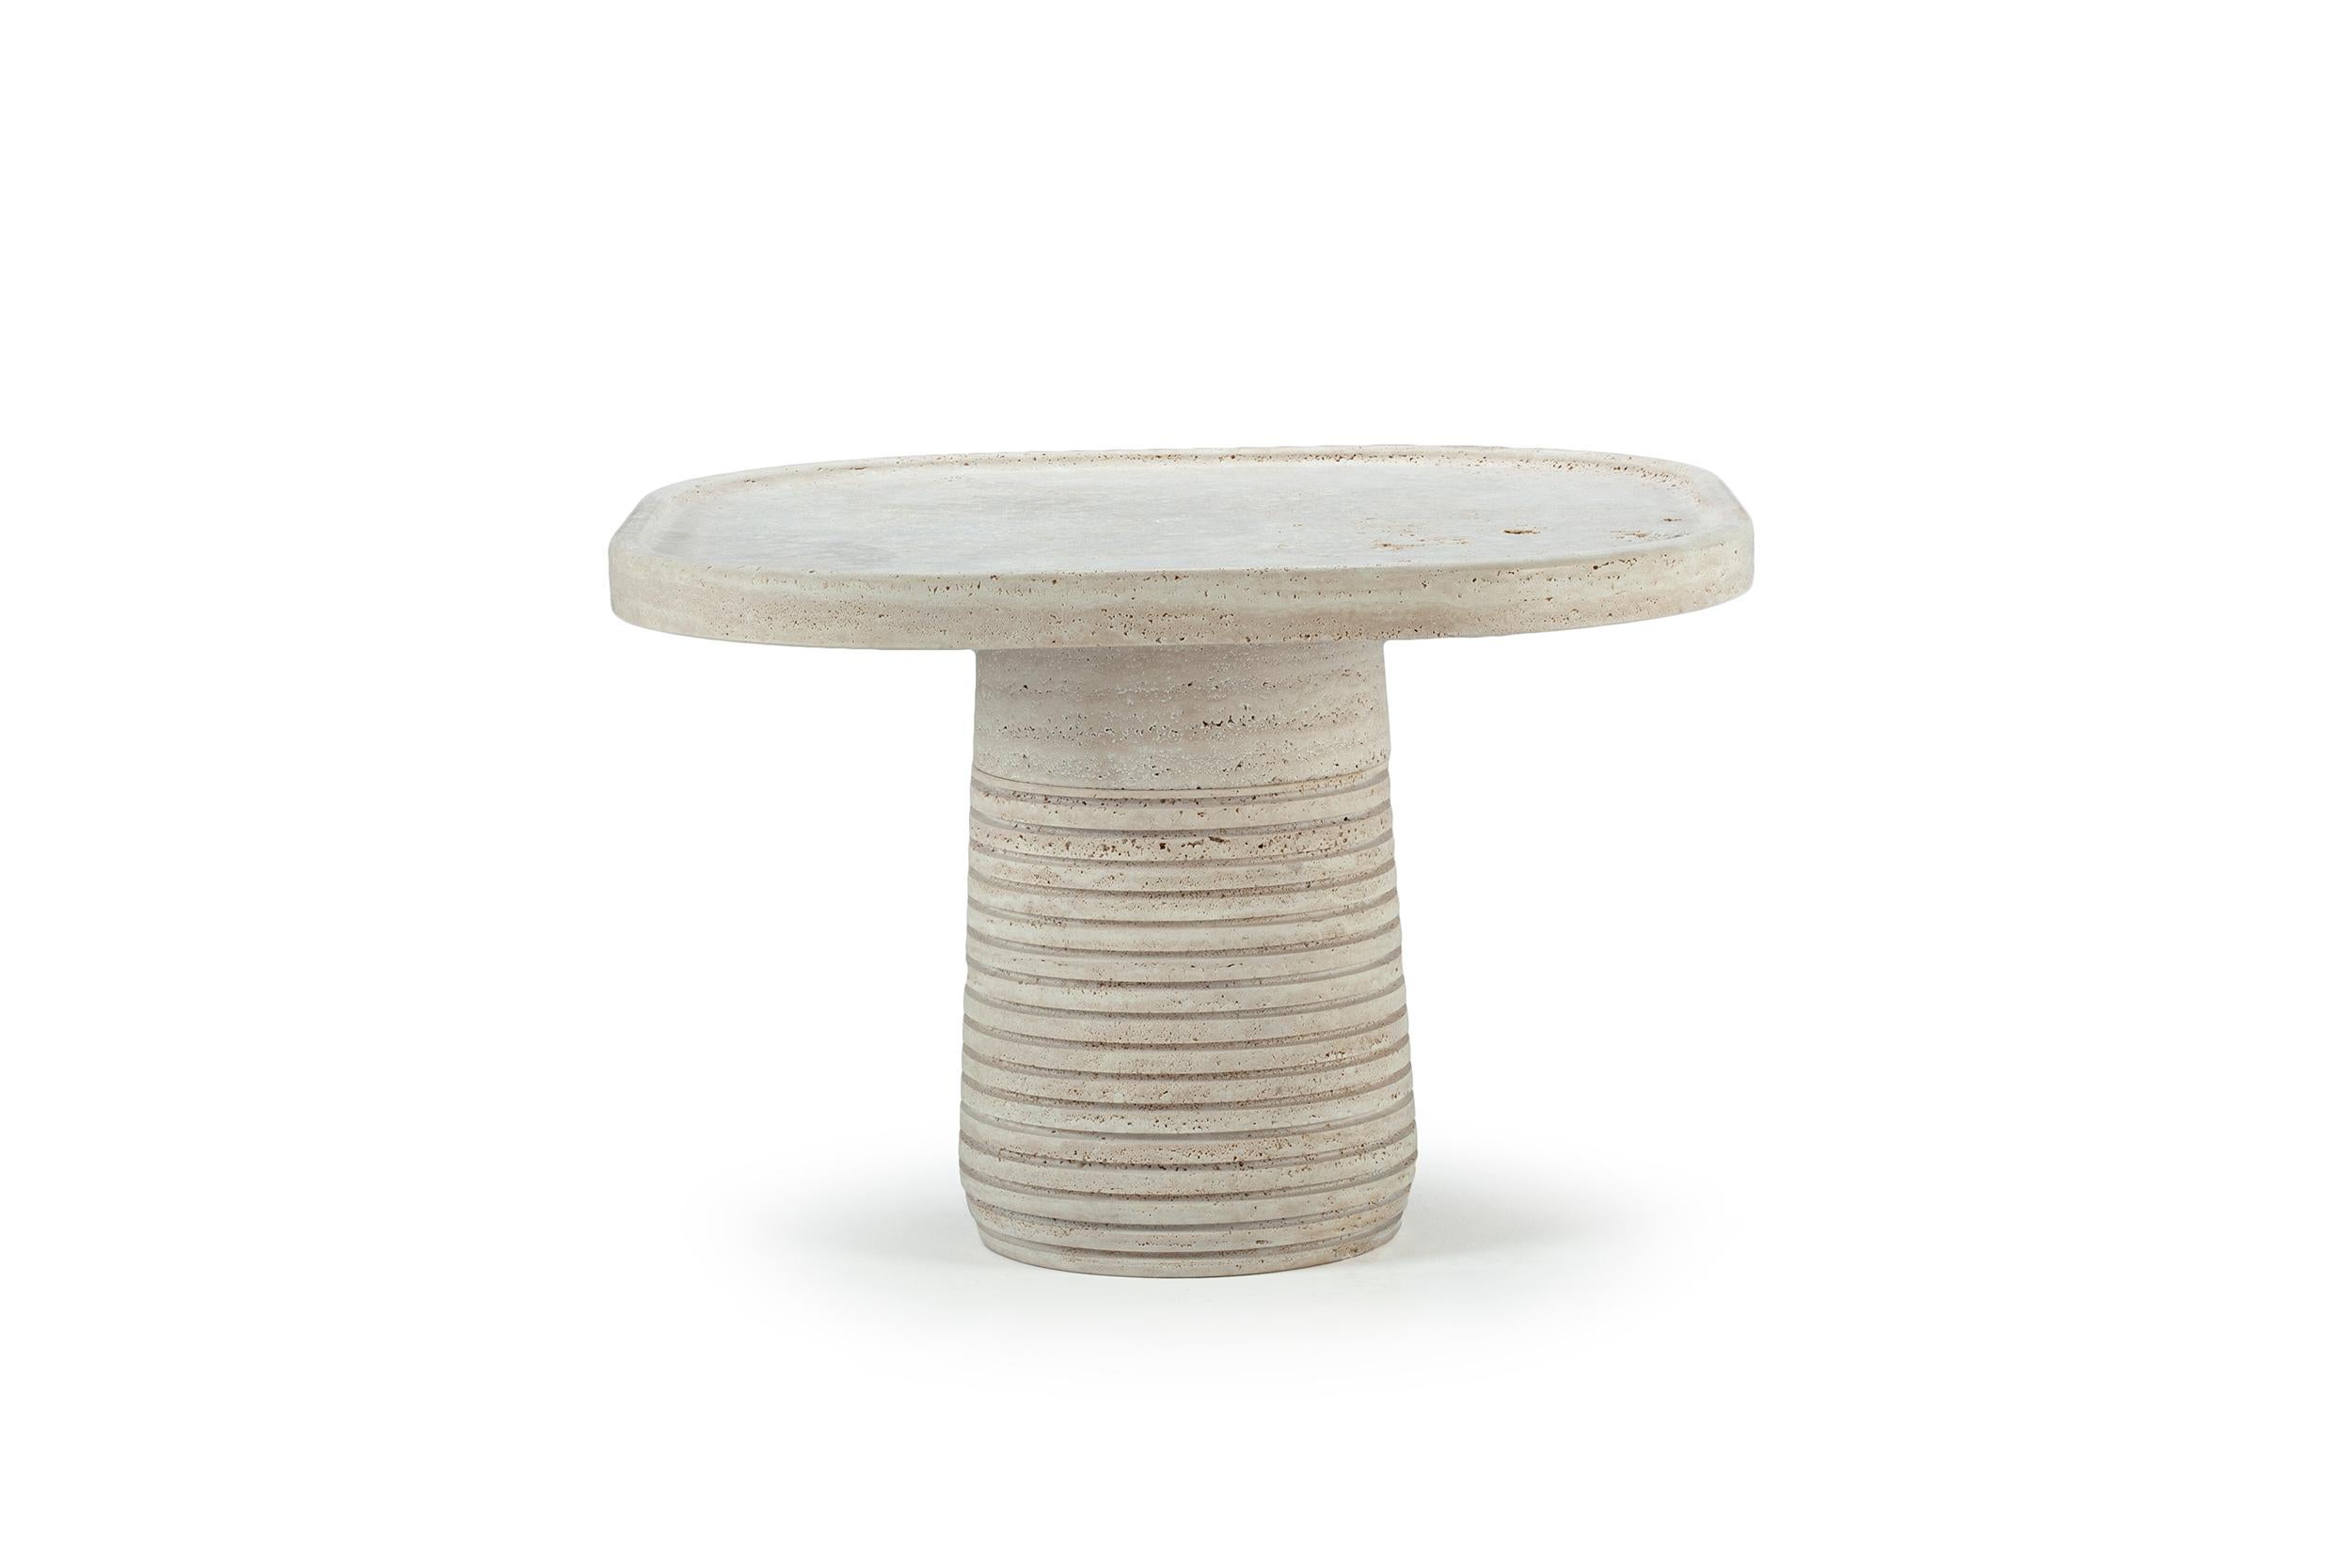 Poppy table is an emblem of nature and organic growth, behind this design lies an essence of naivety effortlessly found within natural forms. Poppy tables are a finely tuned example of how we find elegance within the immediate flow of